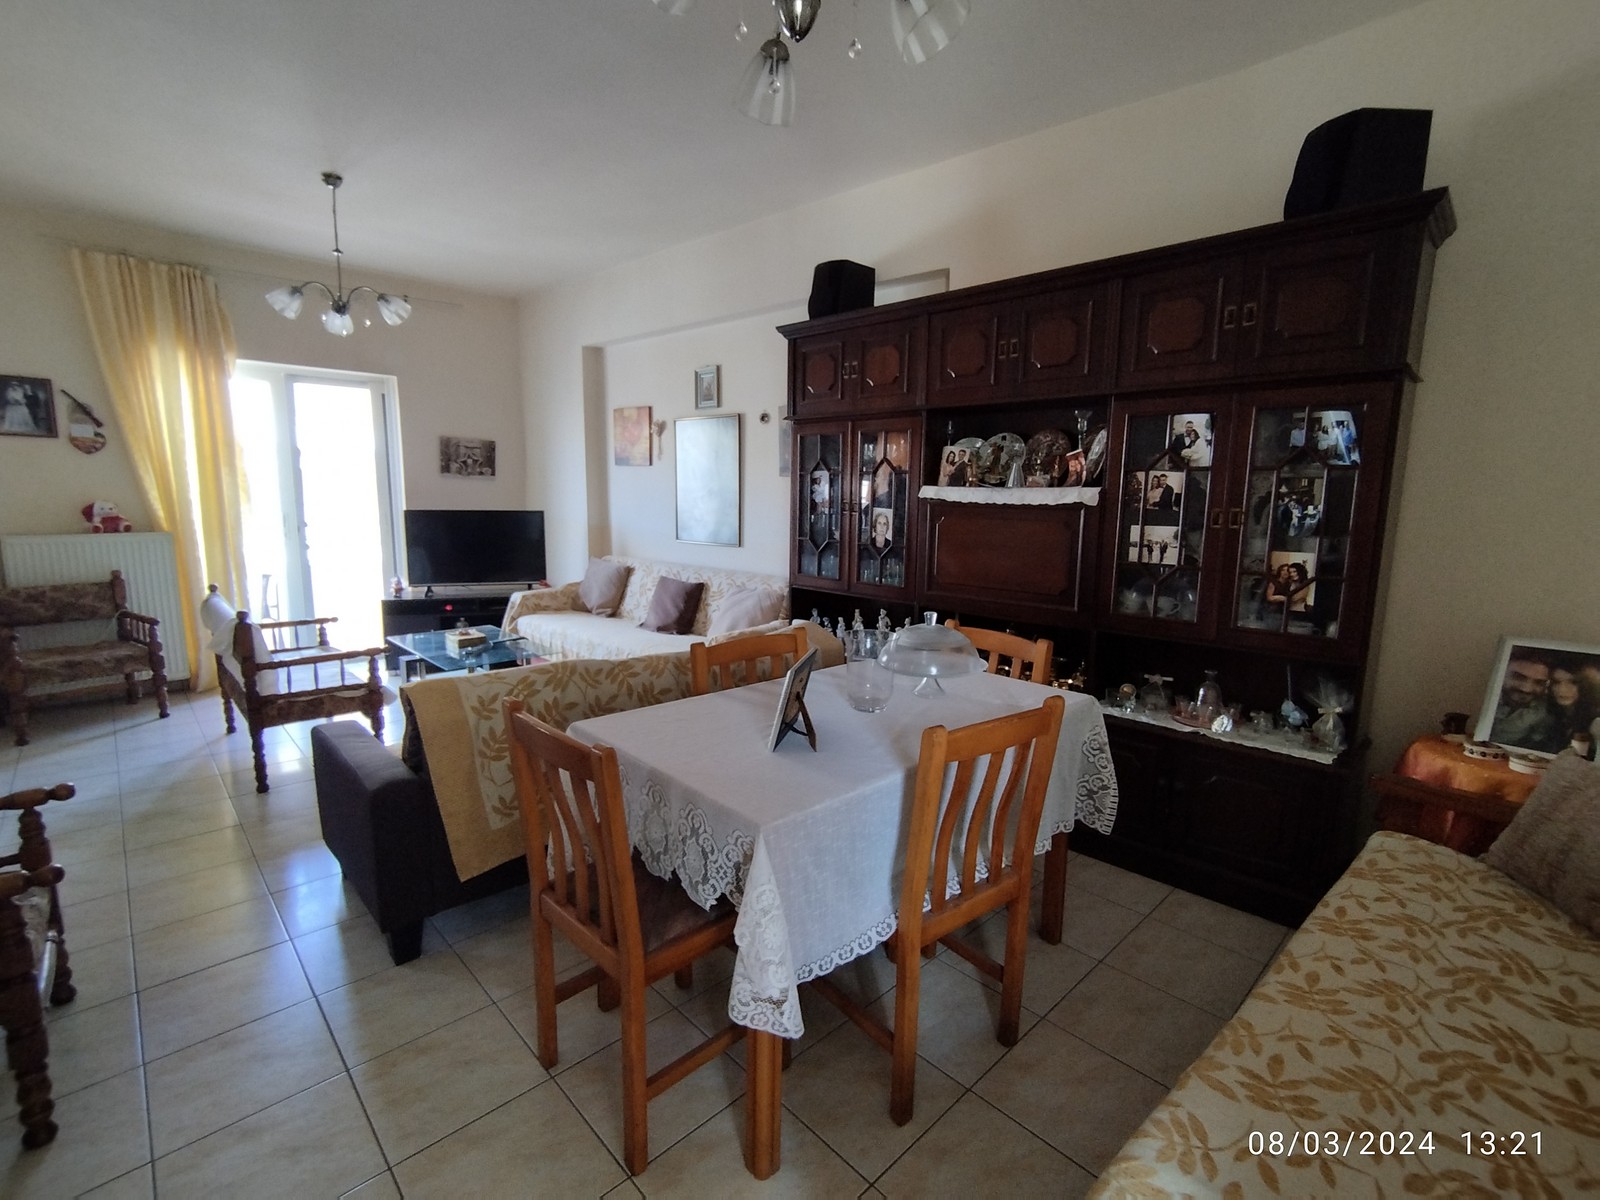 2nd floor apartment in the heart of the city in Sitia.